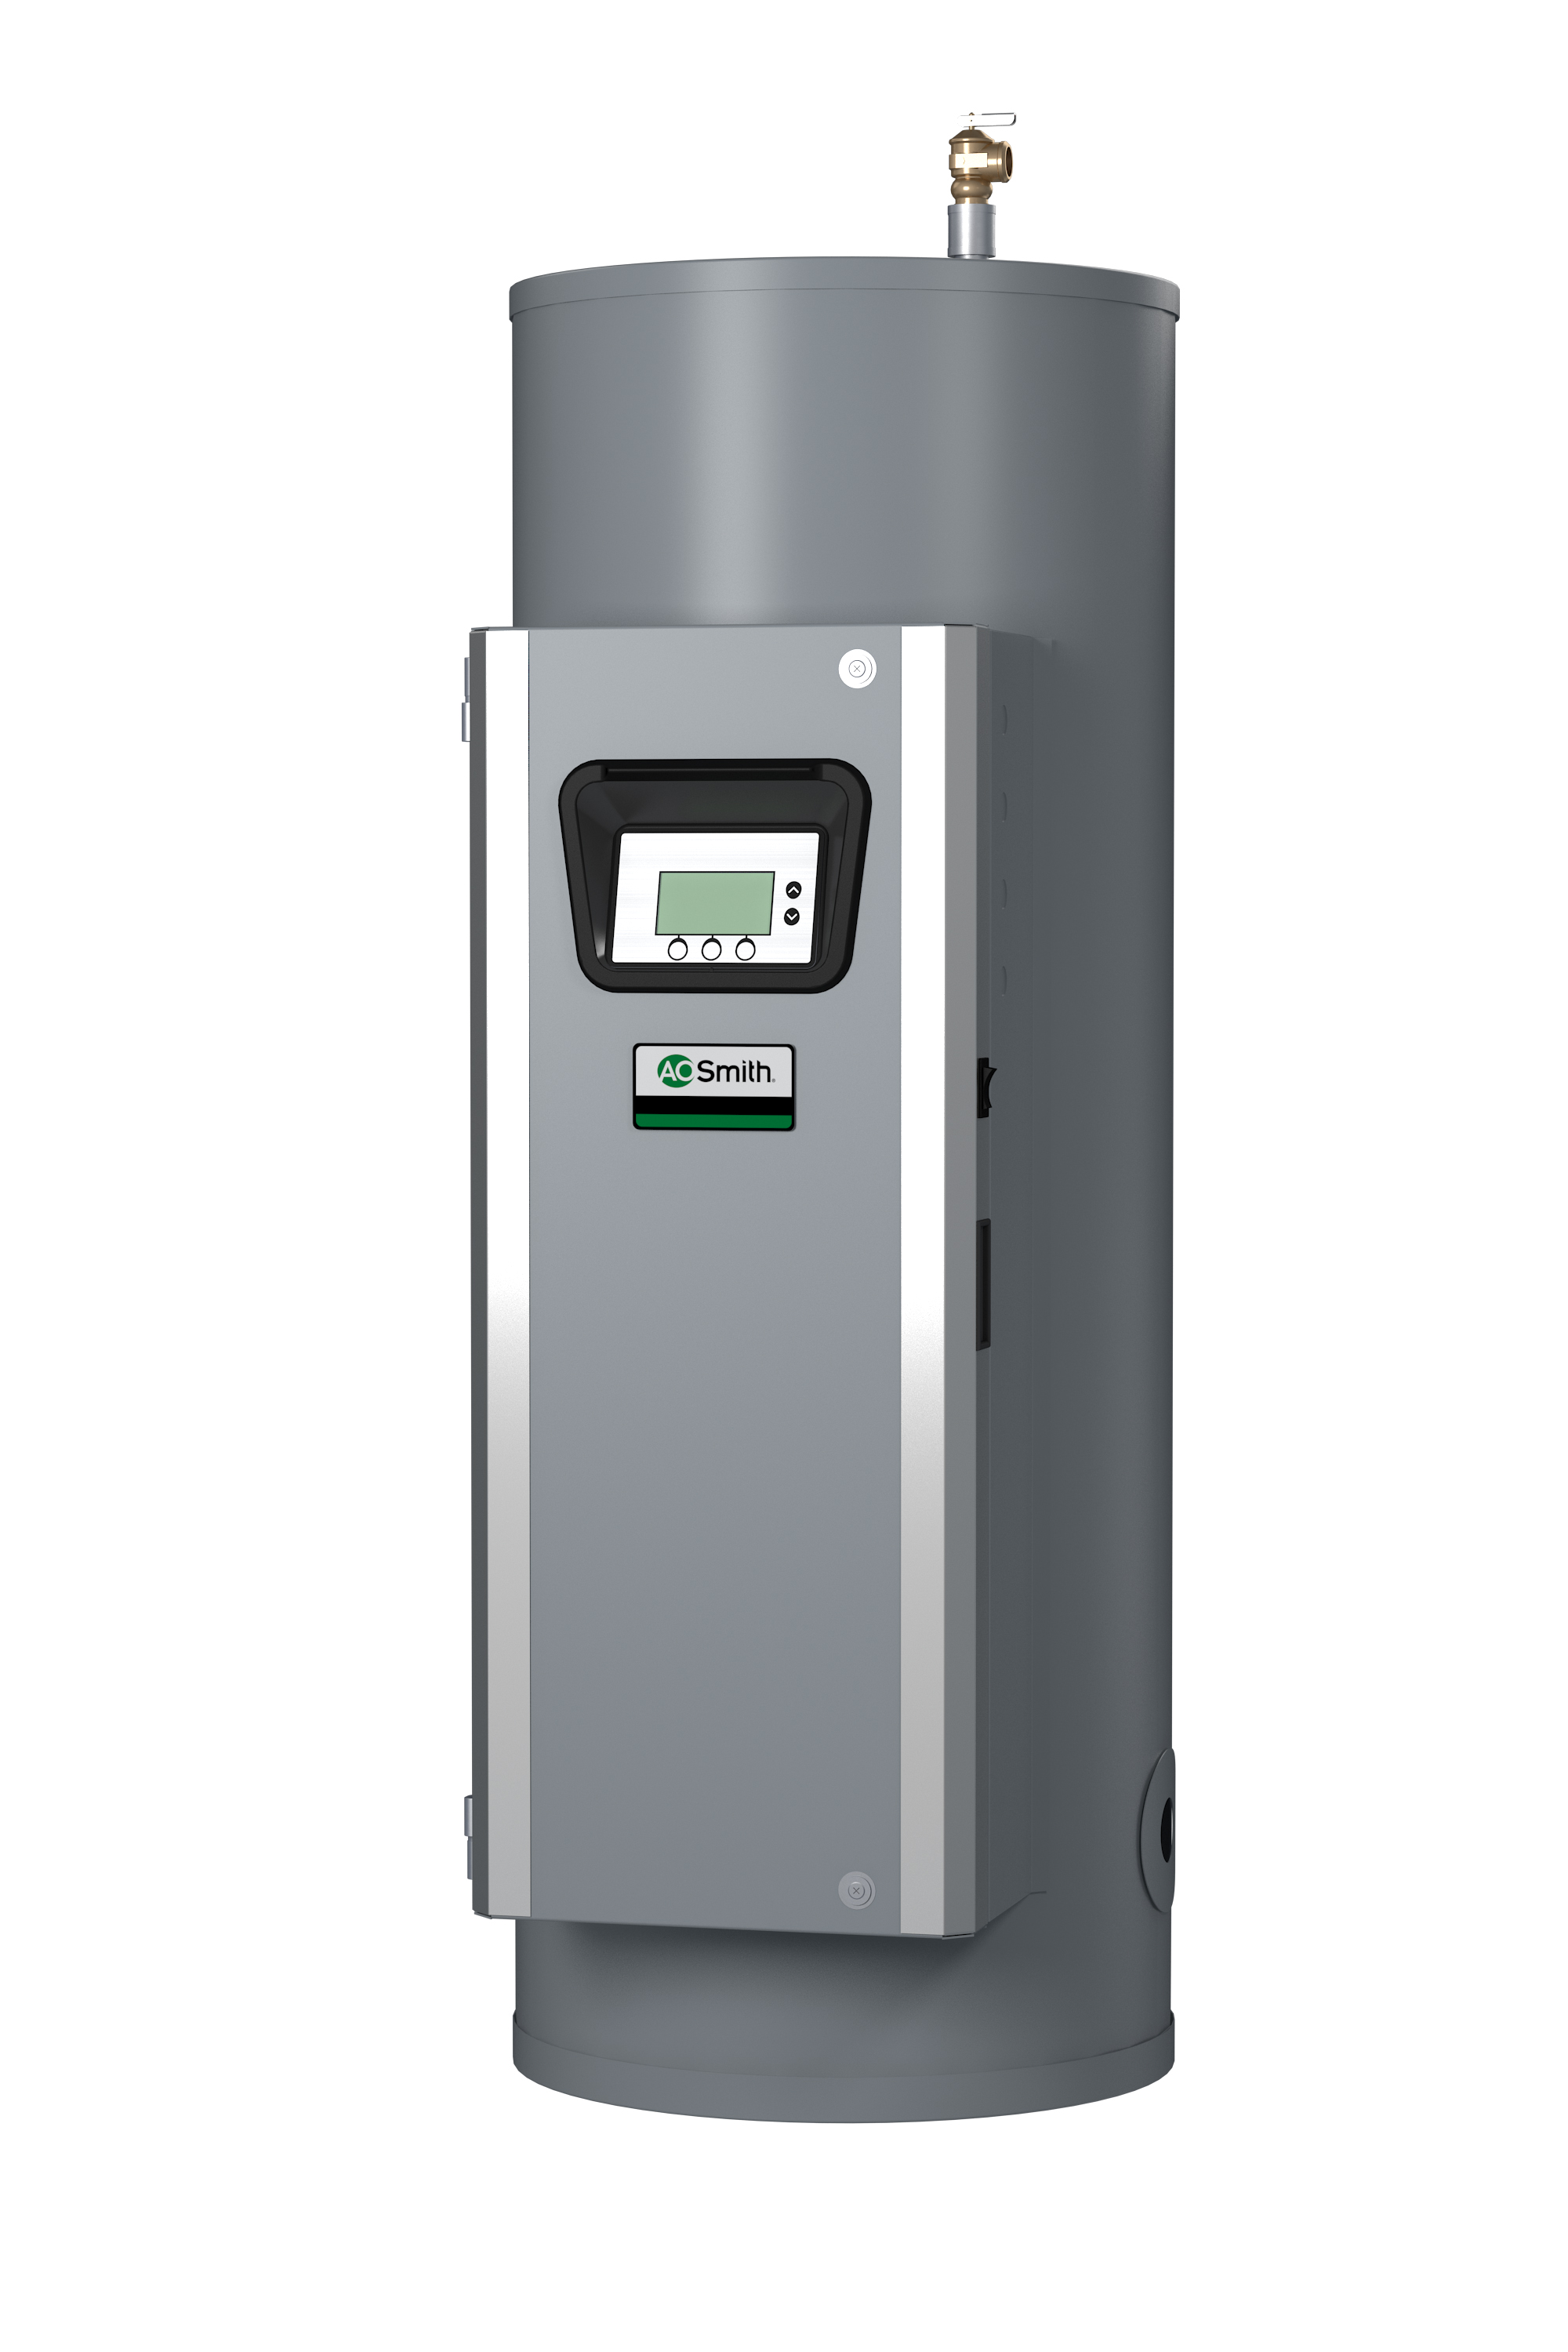 AO SMITH DSE-100A-15, 100 GALLONS, 15KW, 240 VOLT, 36.1 AMPS, 3 PHASE, 1 ELEMENT, ASME CUSTOM Xi SERIES HEAVY DUTY COMMERCIAL ELECTRIC WATER HEATER